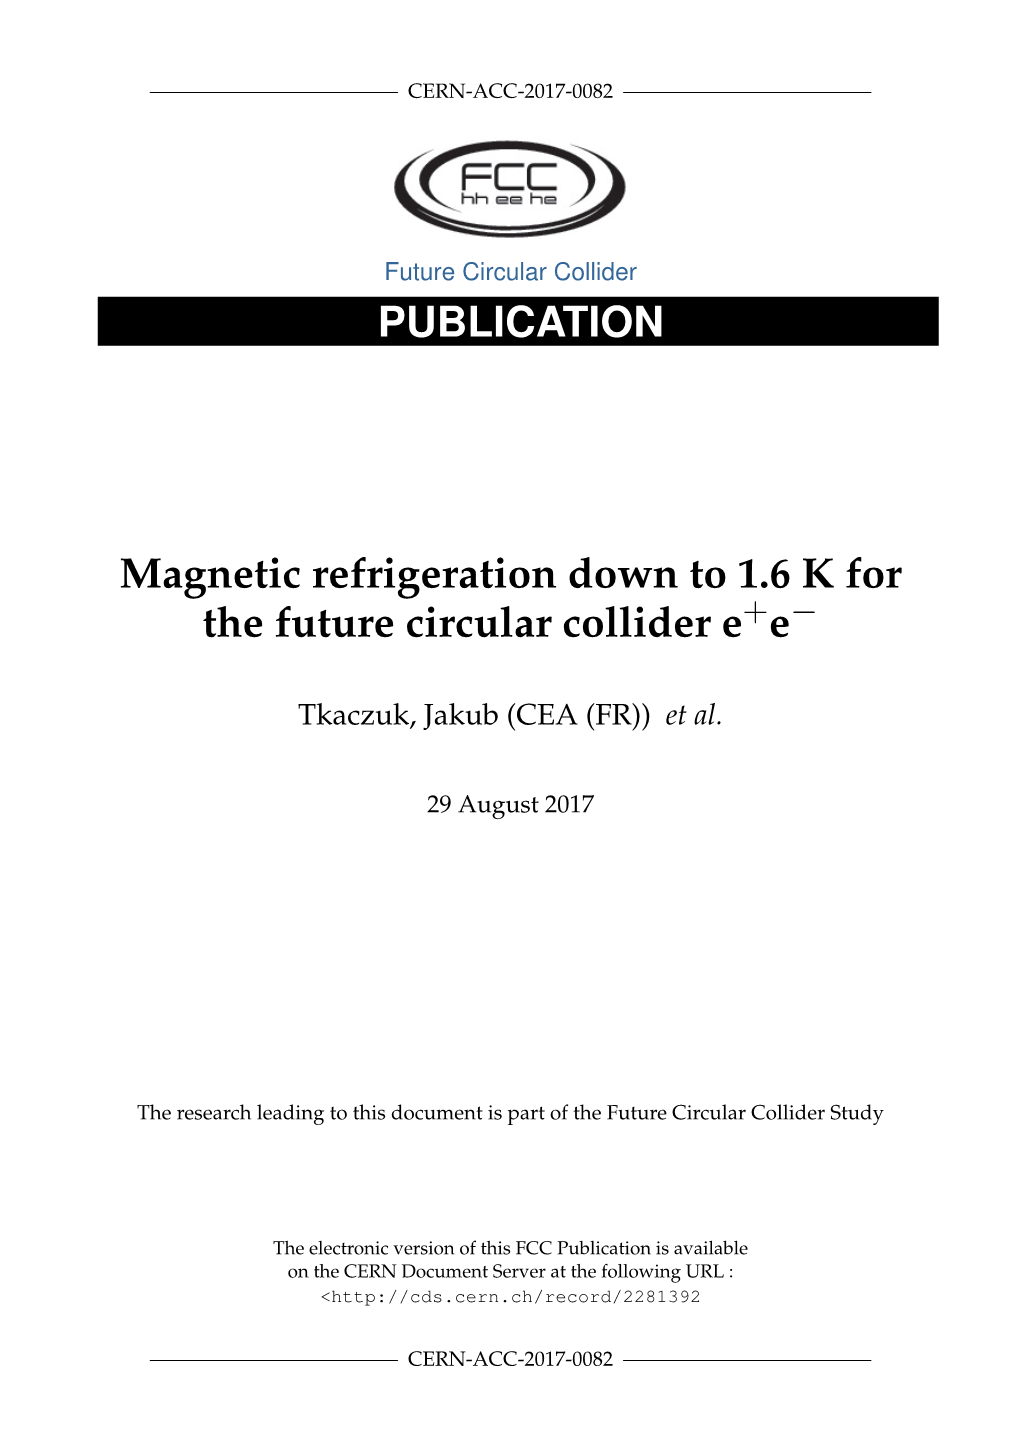 Magnetic Refrigeration Down to 1.6 K for the Future Circular Collider E E−